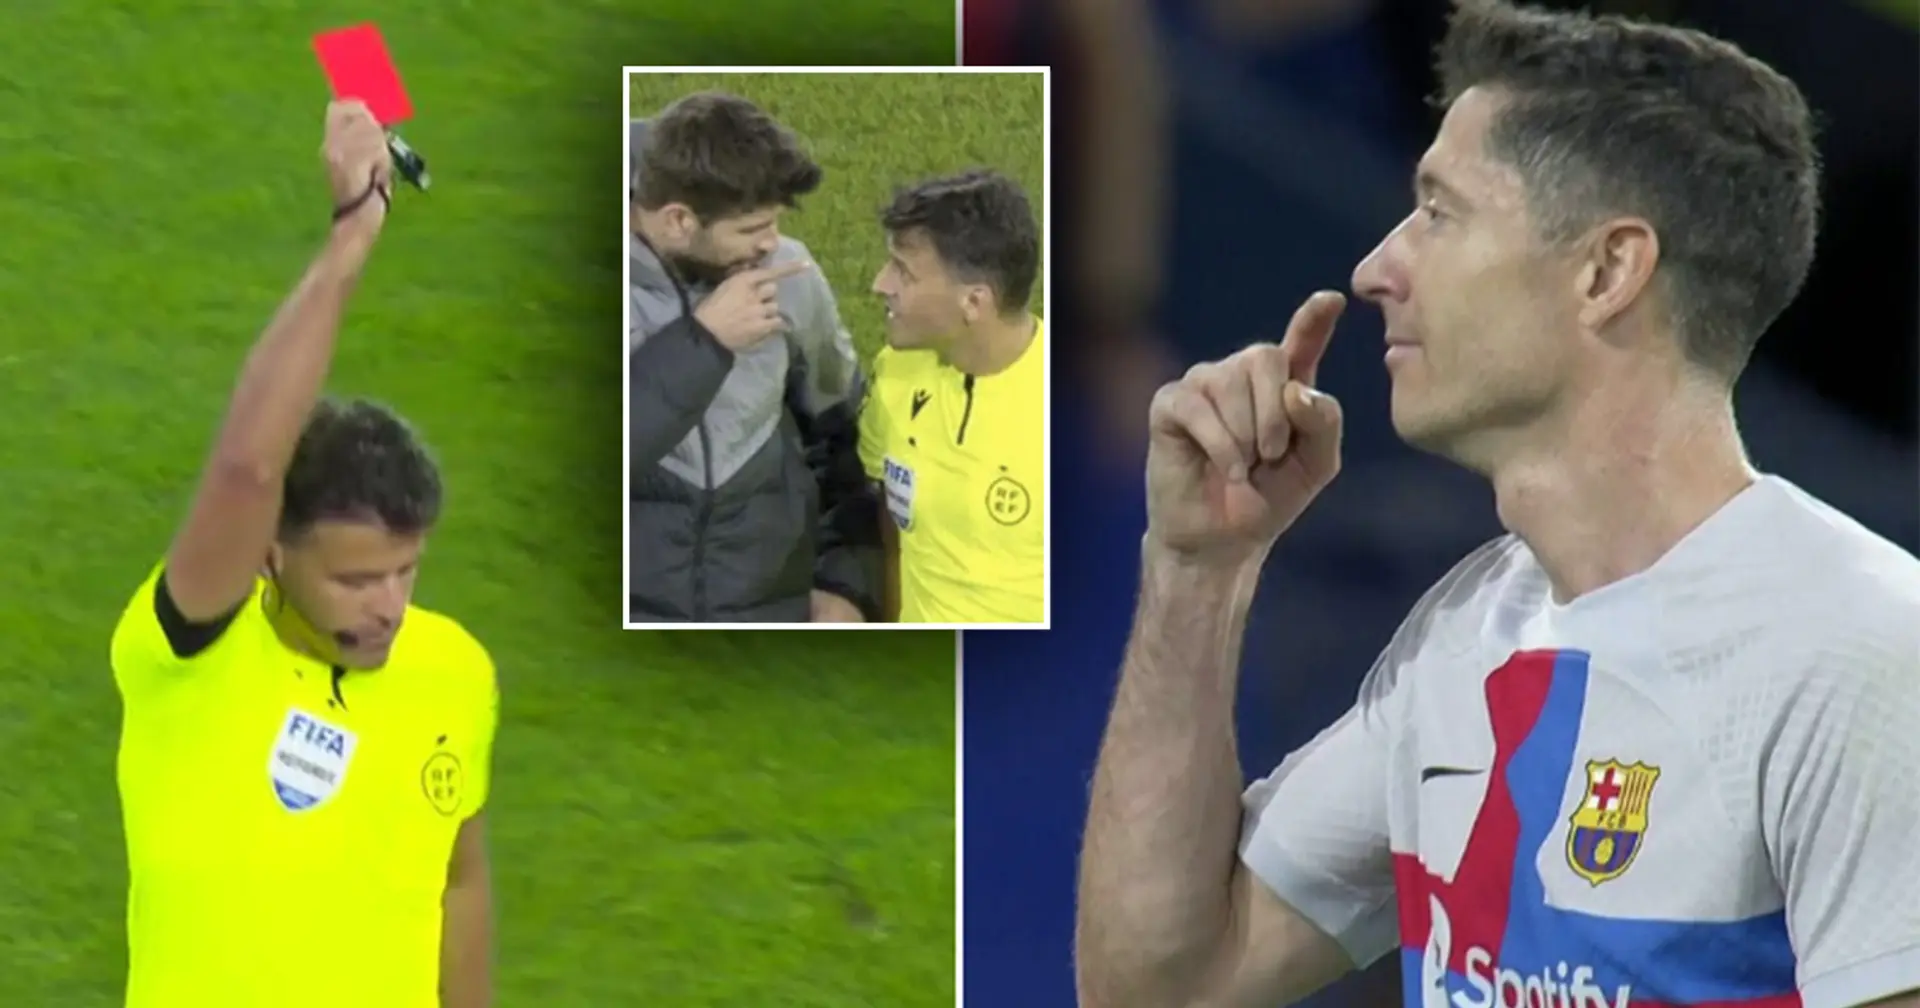 Referee for Copa del Rey match announced, Pique told him he 'screwed Barca the most'